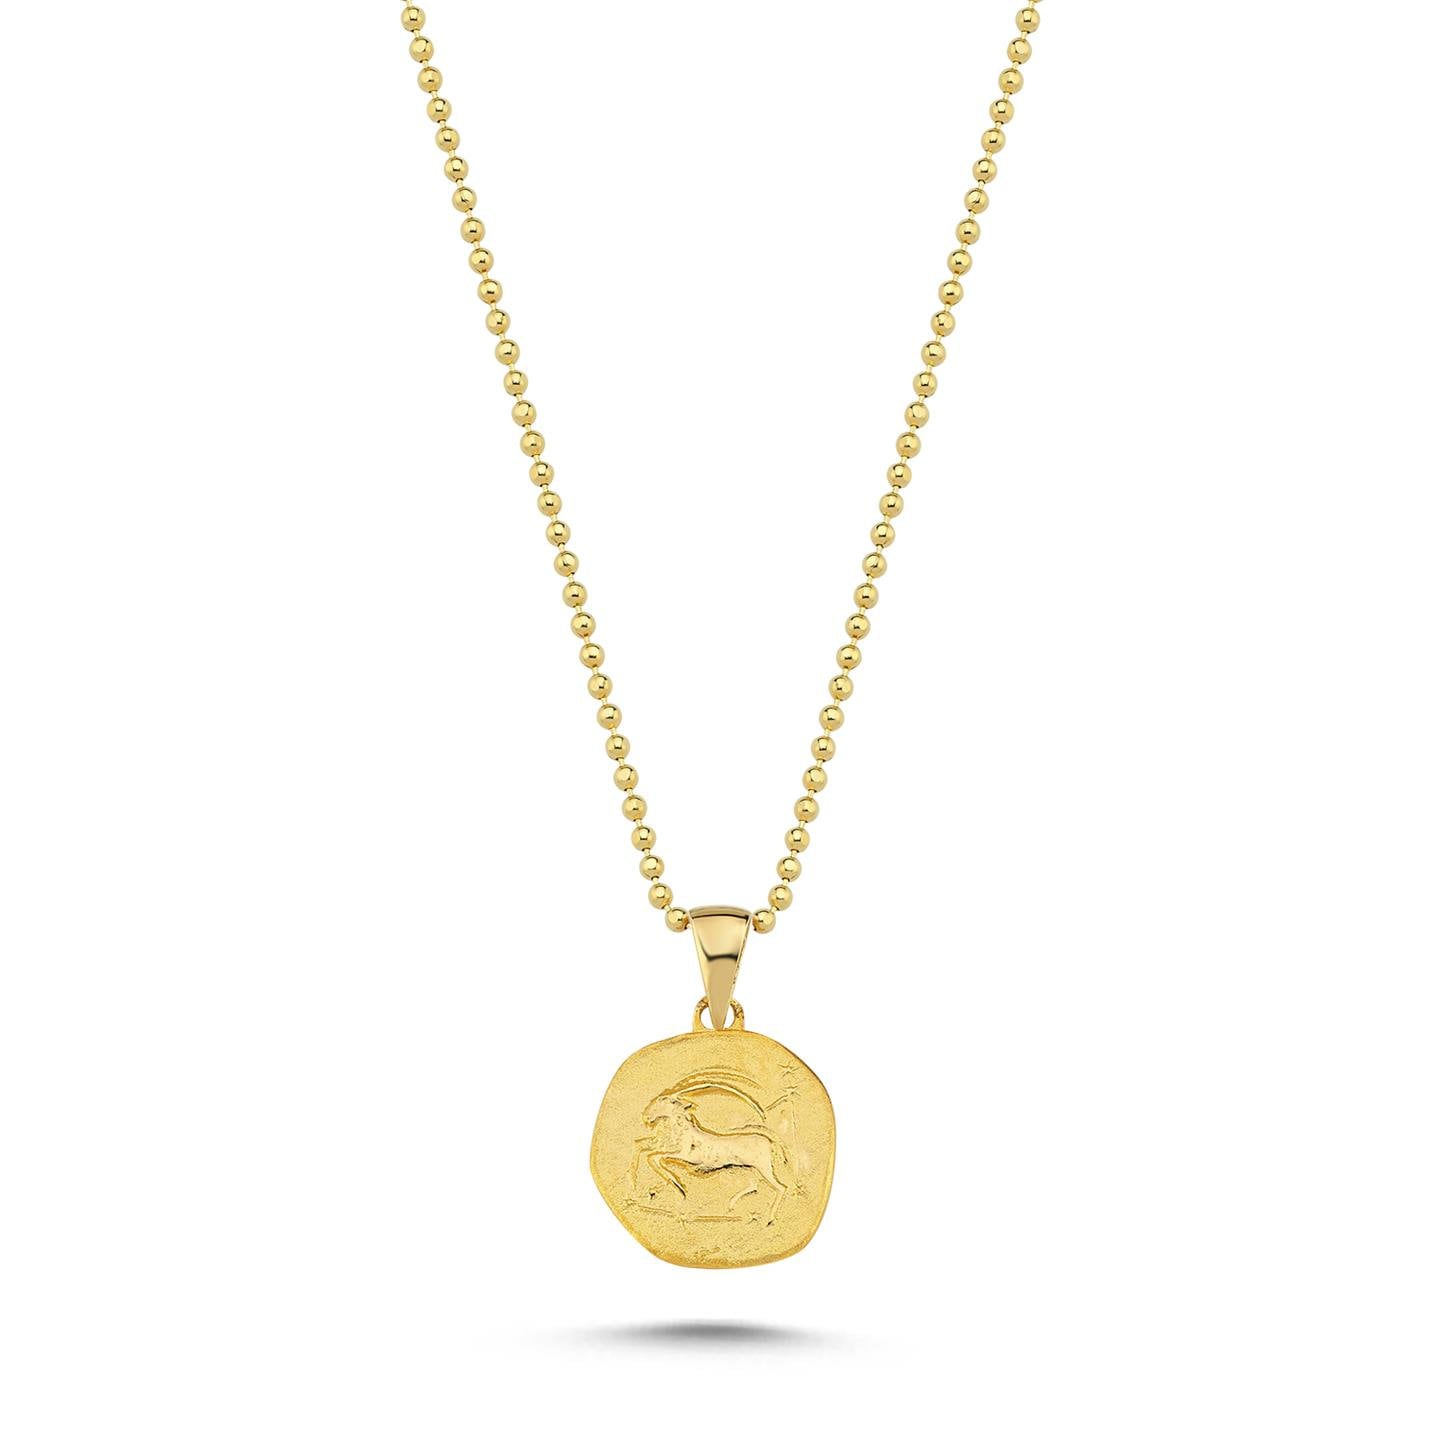 14K Gold Zodiac Capricorn Necklace - Capricorn Pendant - Ideal Gift for Astrology Enthusiasts Hems Jewellery 